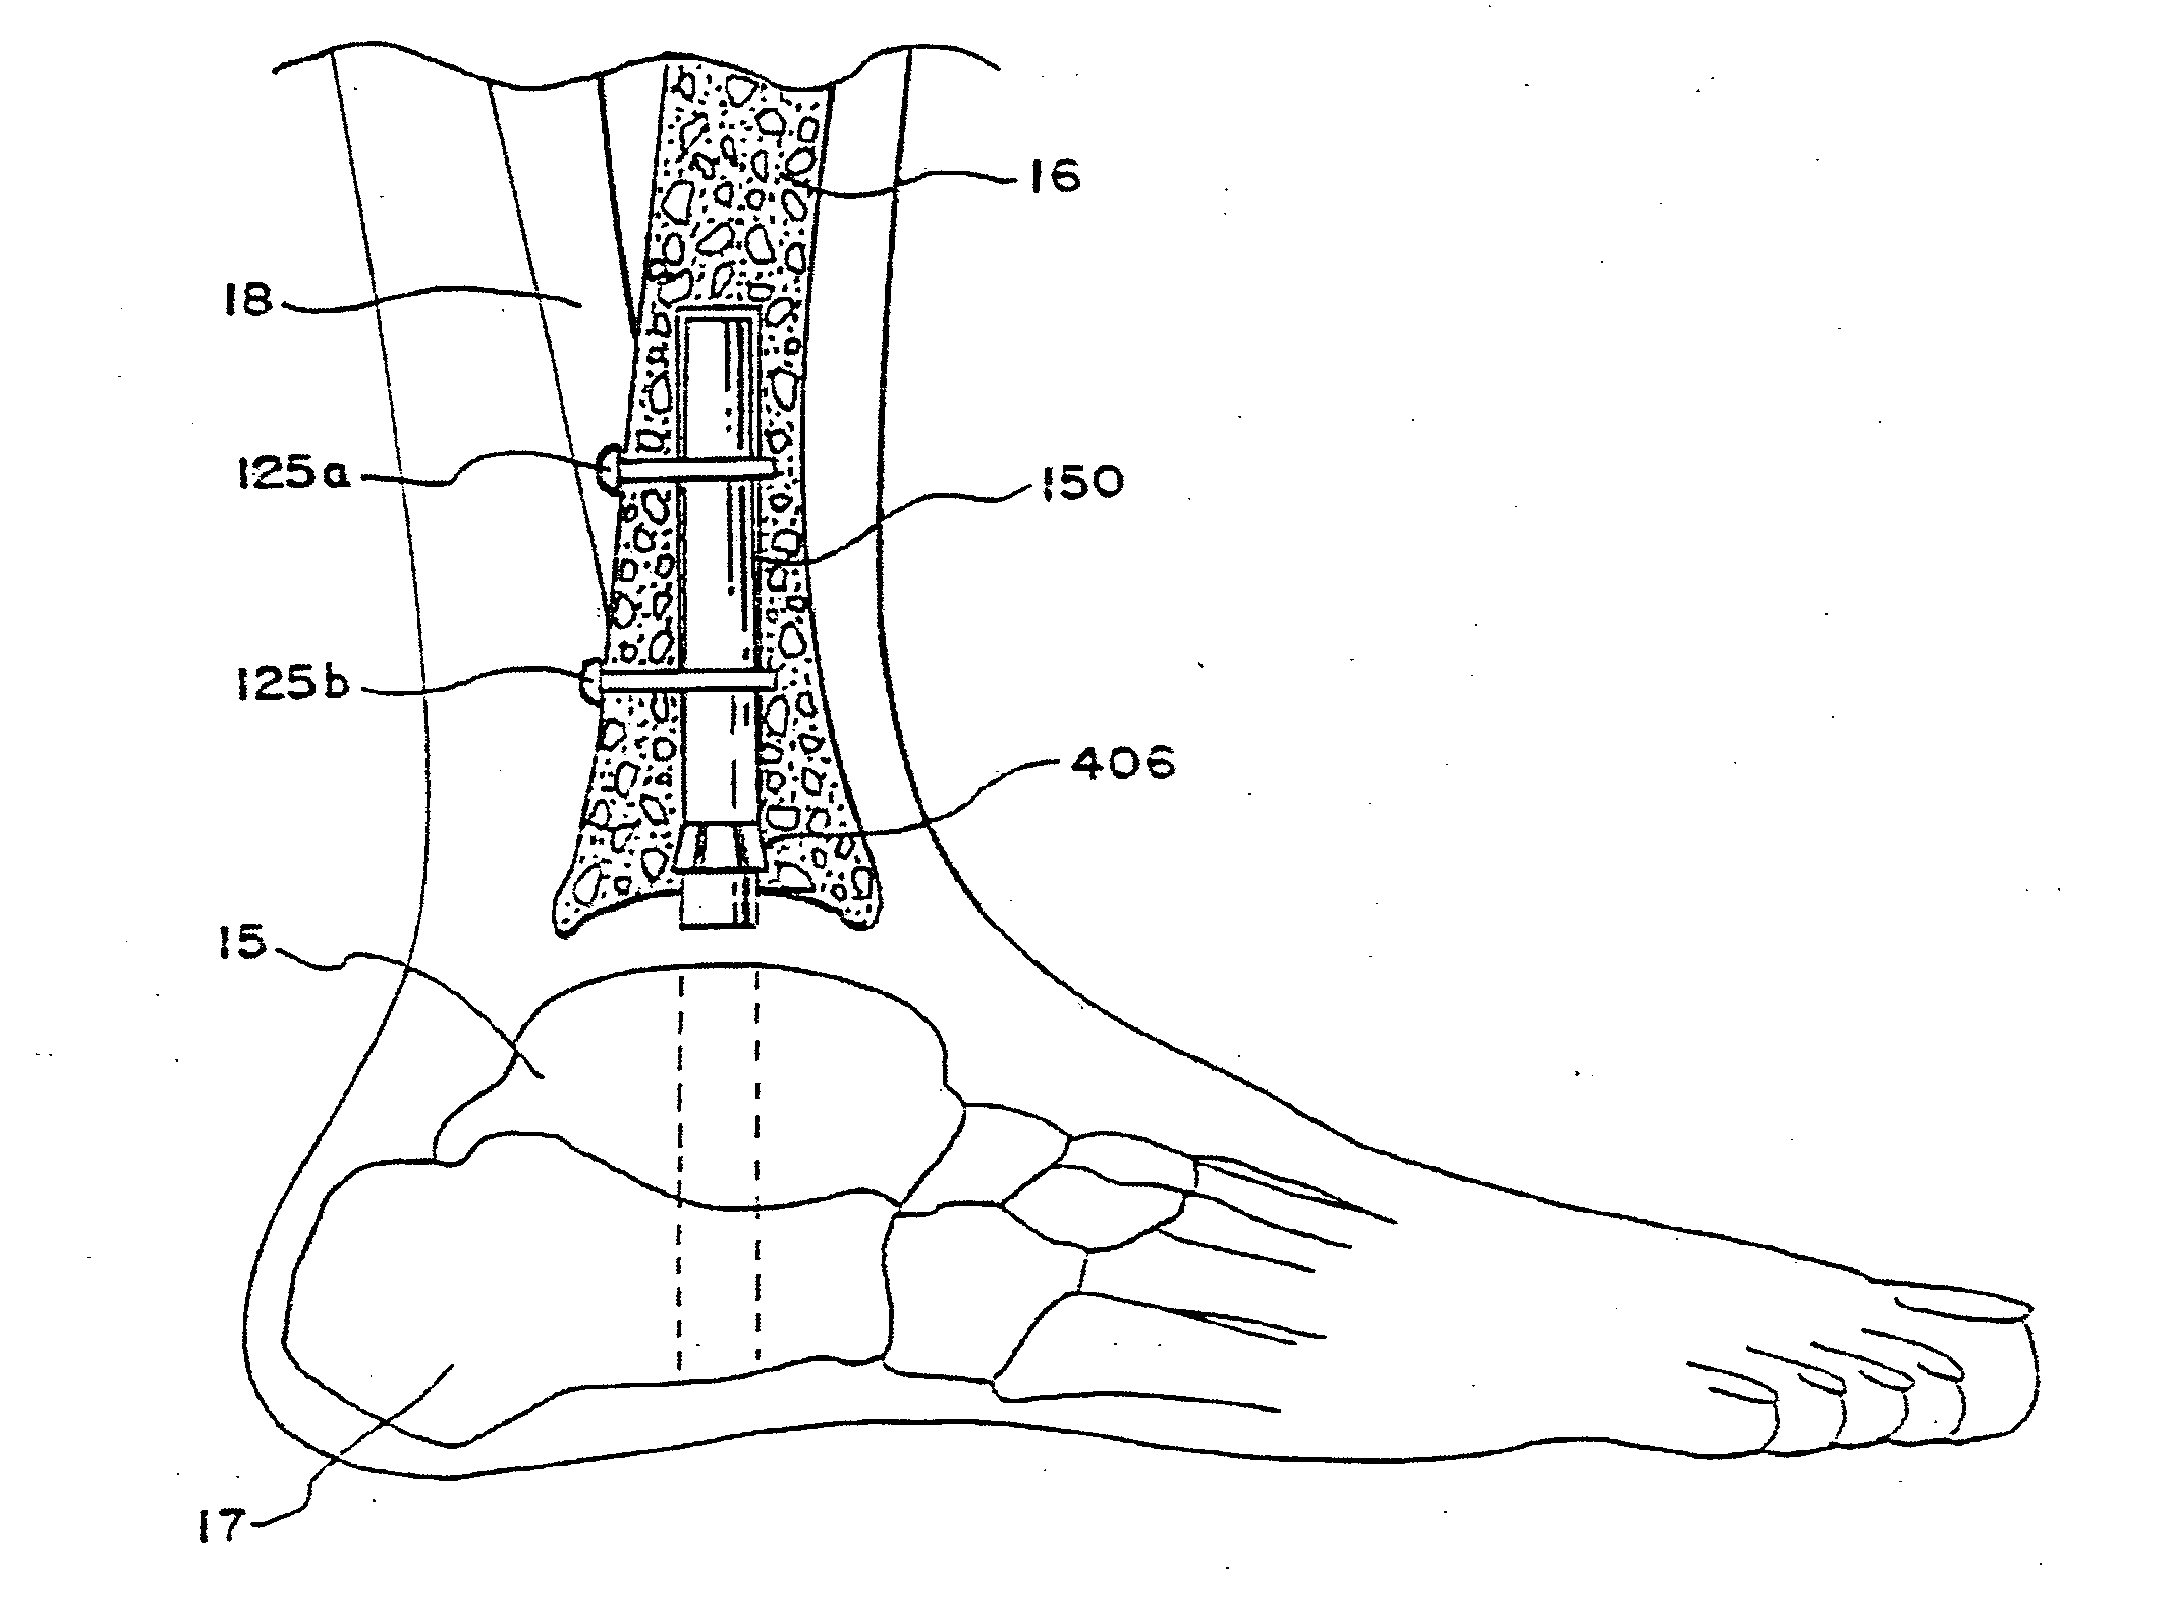 Systems and Methods for Installing Ankle Replacement Prostheses